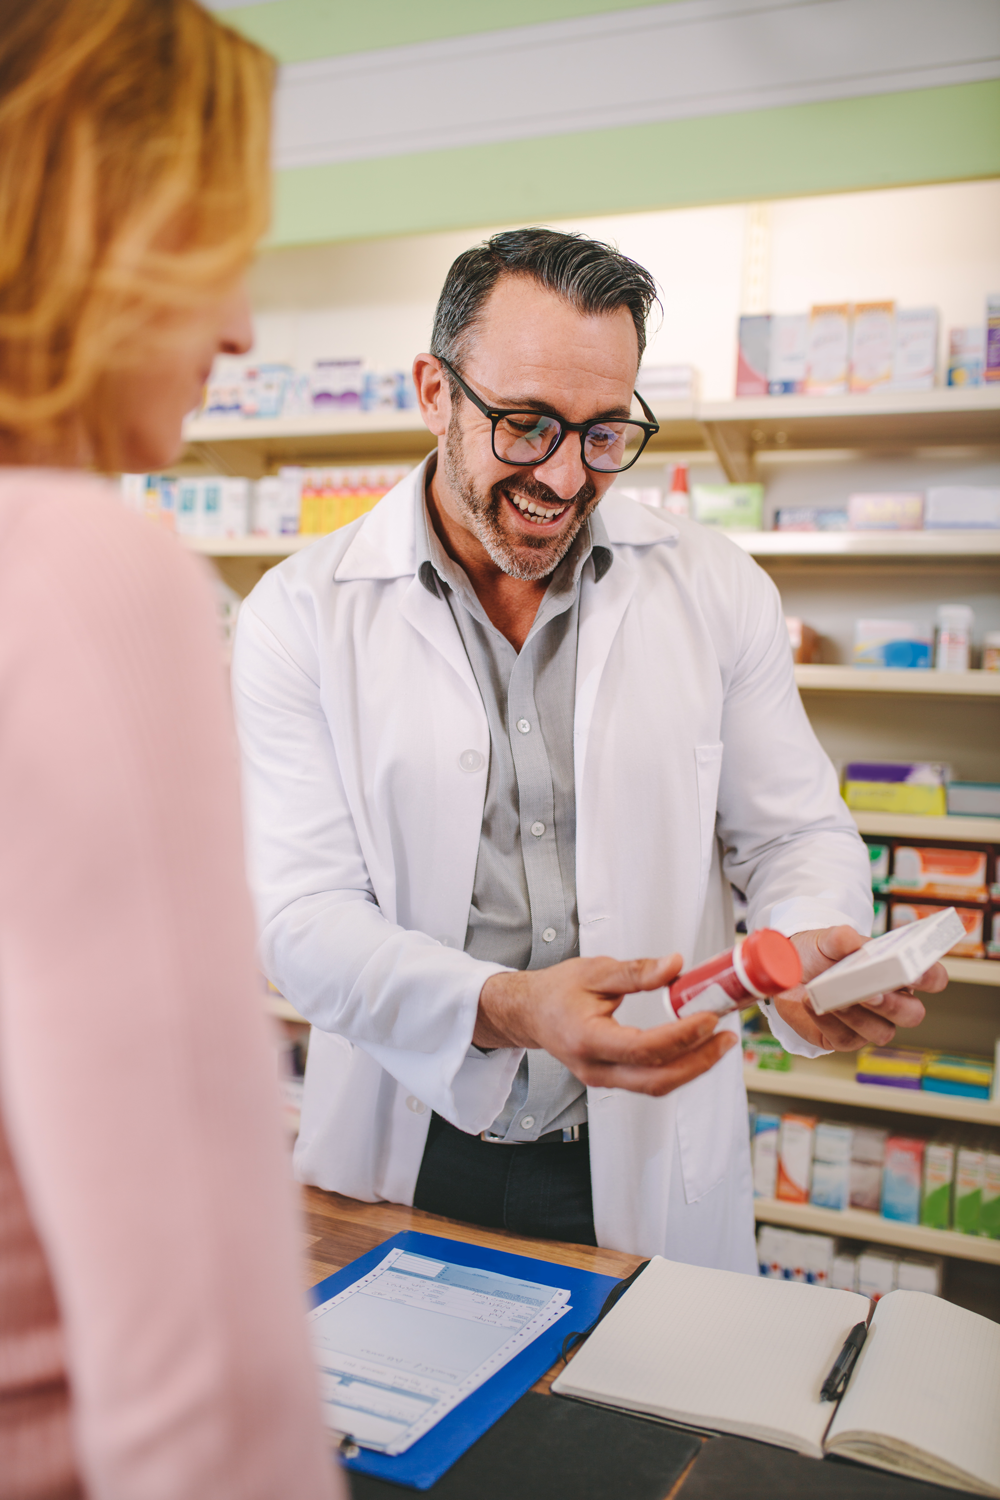 why choose chcw as your pharmacy